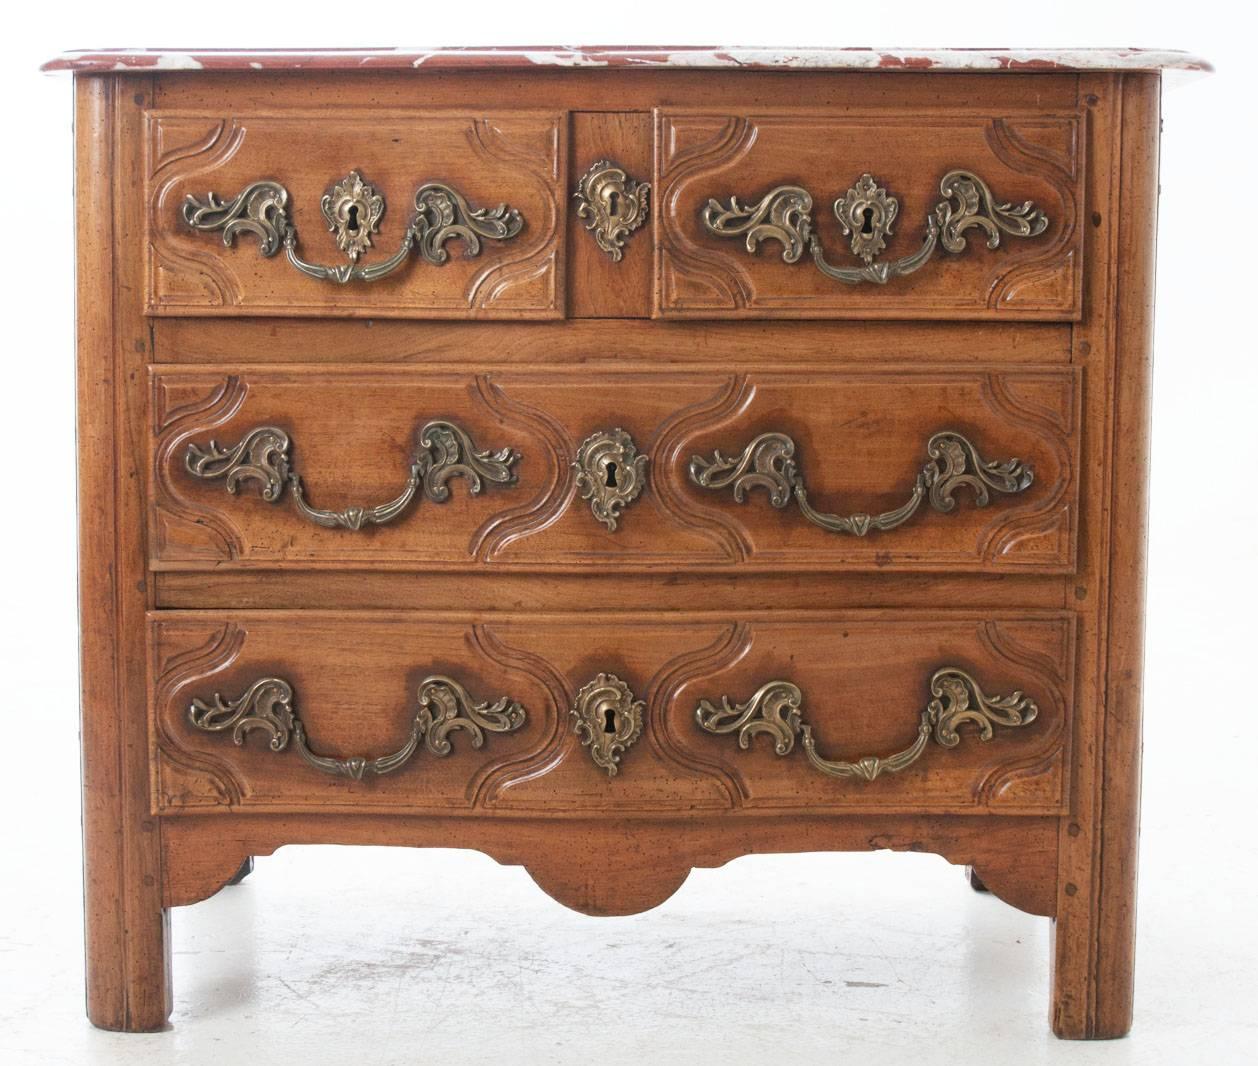 French fruitwood Parisian Regence rustic marble-top commode, circa early 1700s.
The shaped marble top over two small raised and recessed panel drawers above two long raised and recessed panel drawers. The shaped apron raised on rounded rectilinear